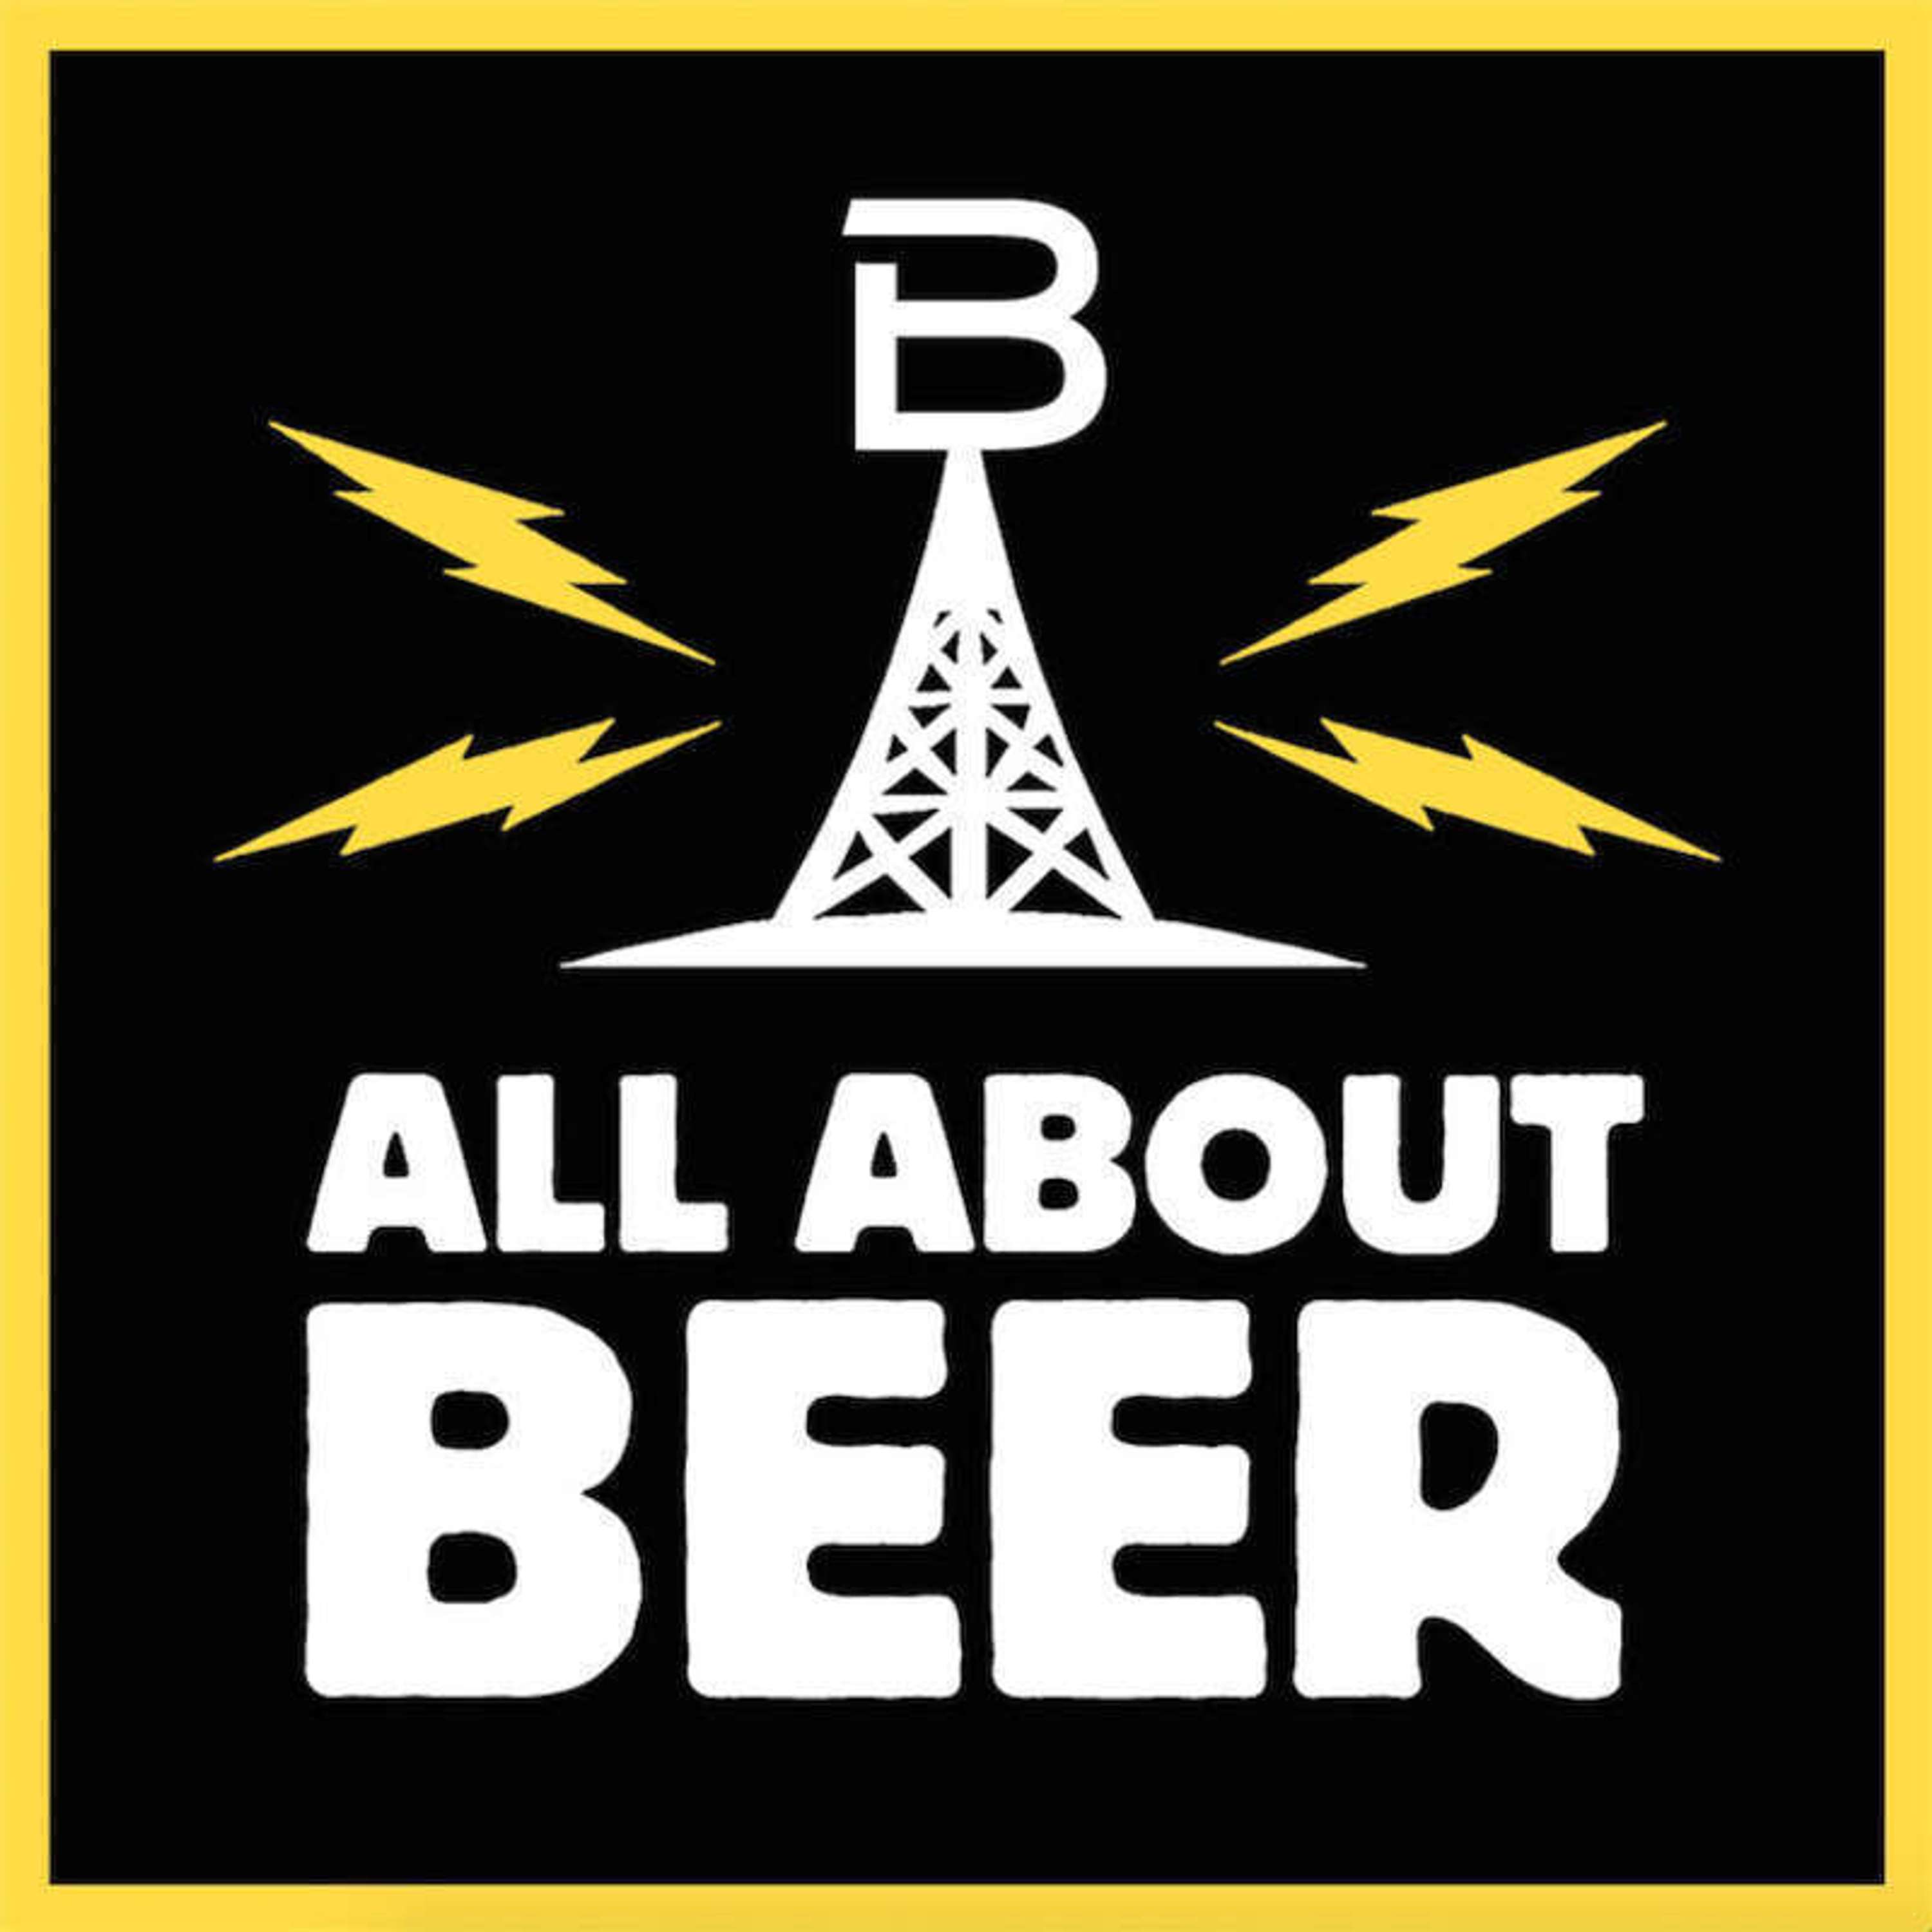 Introducing The All About Beer Podcast